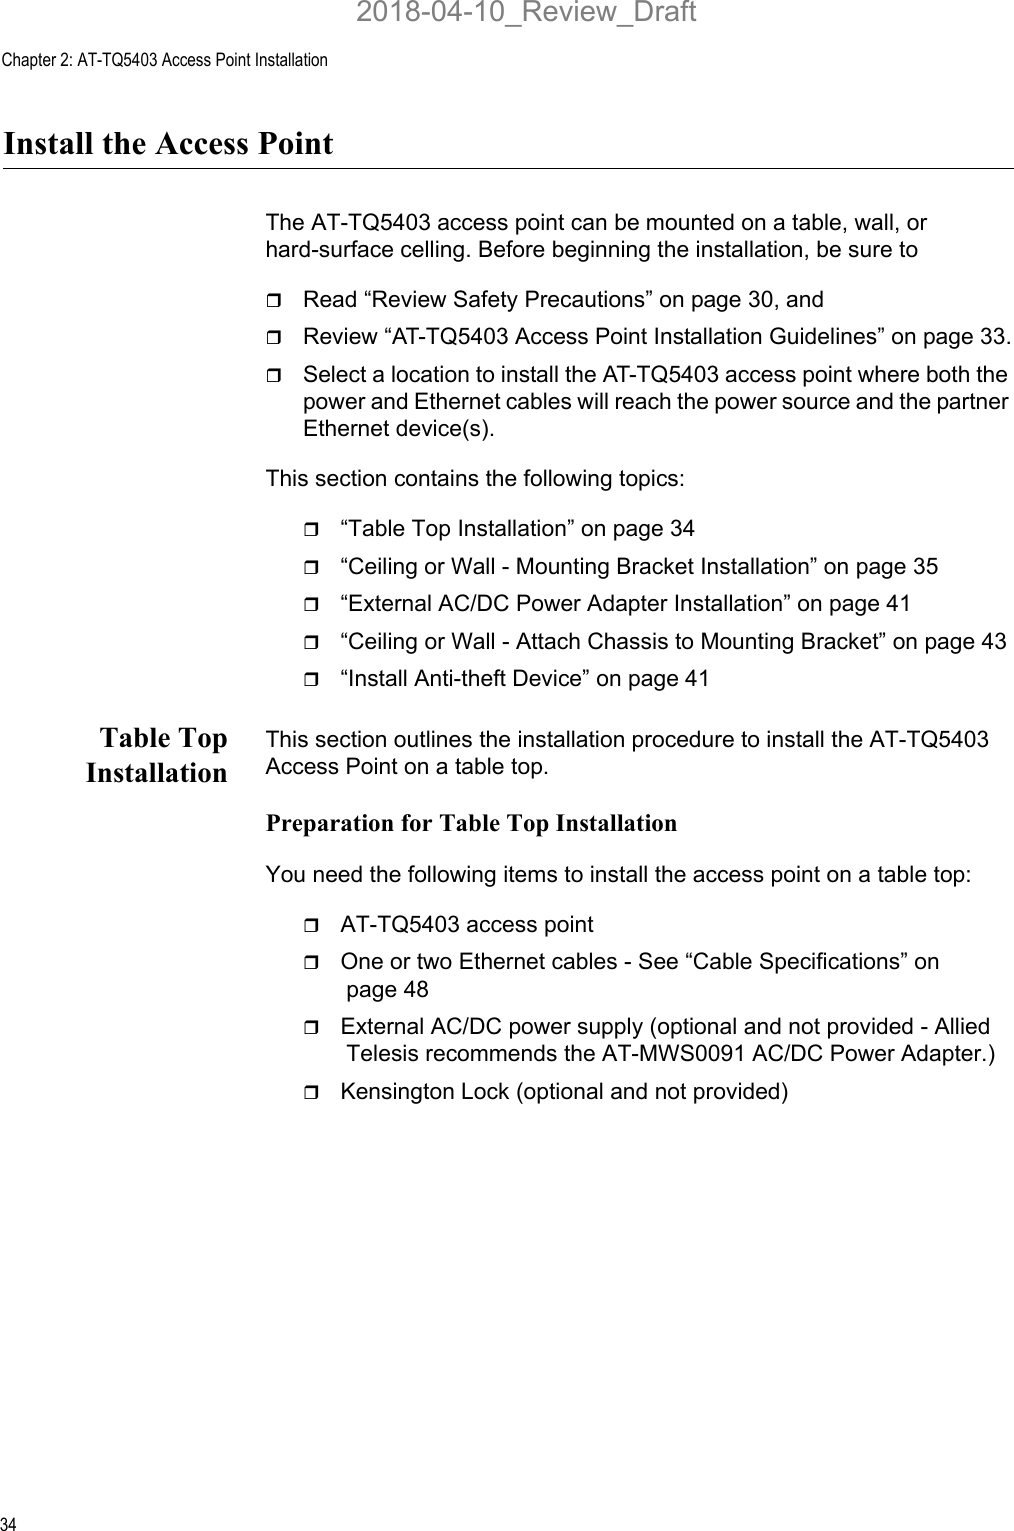 Chapter 2: AT-TQ5403 Access Point Installation34Install the Access PointThe AT-TQ5403 access point can be mounted on a table, wall, or hard-surface celling. Before beginning the installation, be sure to Read “Review Safety Precautions” on page 30, andReview “AT-TQ5403 Access Point Installation Guidelines” on page 33.Select a location to install the AT-TQ5403 access point where both the power and Ethernet cables will reach the power source and the partner Ethernet device(s).This section contains the following topics:“Table Top Installation” on page 34“Ceiling or Wall - Mounting Bracket Installation” on page 35“External AC/DC Power Adapter Installation” on page 41“Ceiling or Wall - Attach Chassis to Mounting Bracket” on page 43“Install Anti-theft Device” on page 41Table TopInstallationThis section outlines the installation procedure to install the AT-TQ5403 Access Point on a table top.Preparation for Table Top InstallationYou need the following items to install the access point on a table top:AT-TQ5403 access pointOne or two Ethernet cables - See “Cable Specifications” on page 48External AC/DC power supply (optional and not provided - Allied Telesis recommends the AT-MWS0091 AC/DC Power Adapter.)Kensington Lock (optional and not provided)2018-04-10_Review_Draft